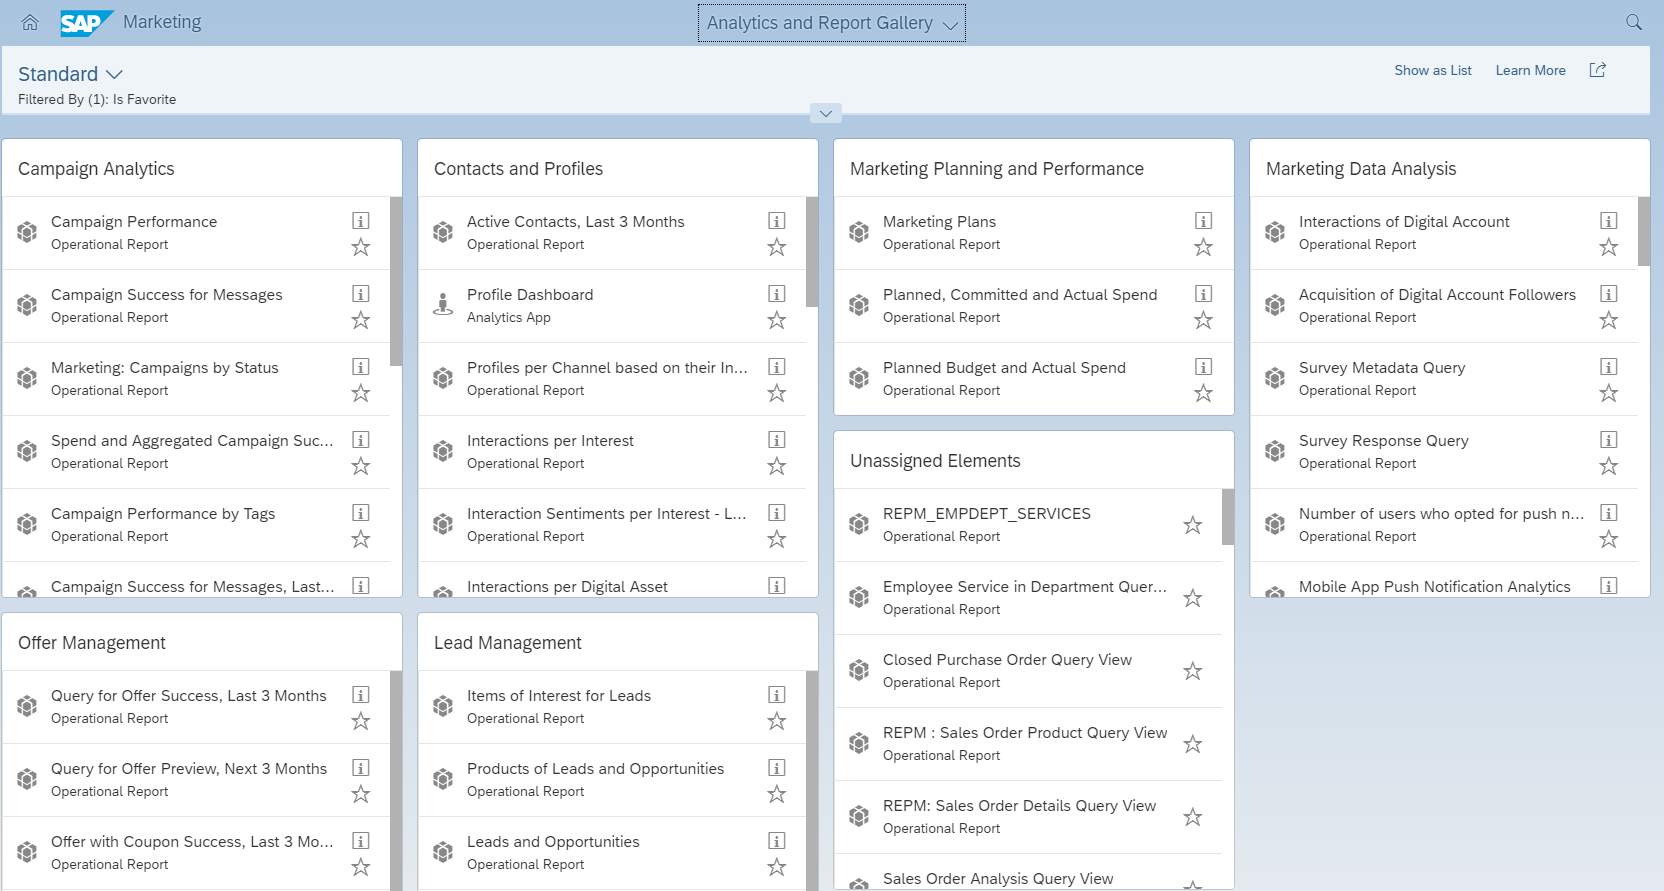 Users get access to a new application – Analytics and Report Gallery